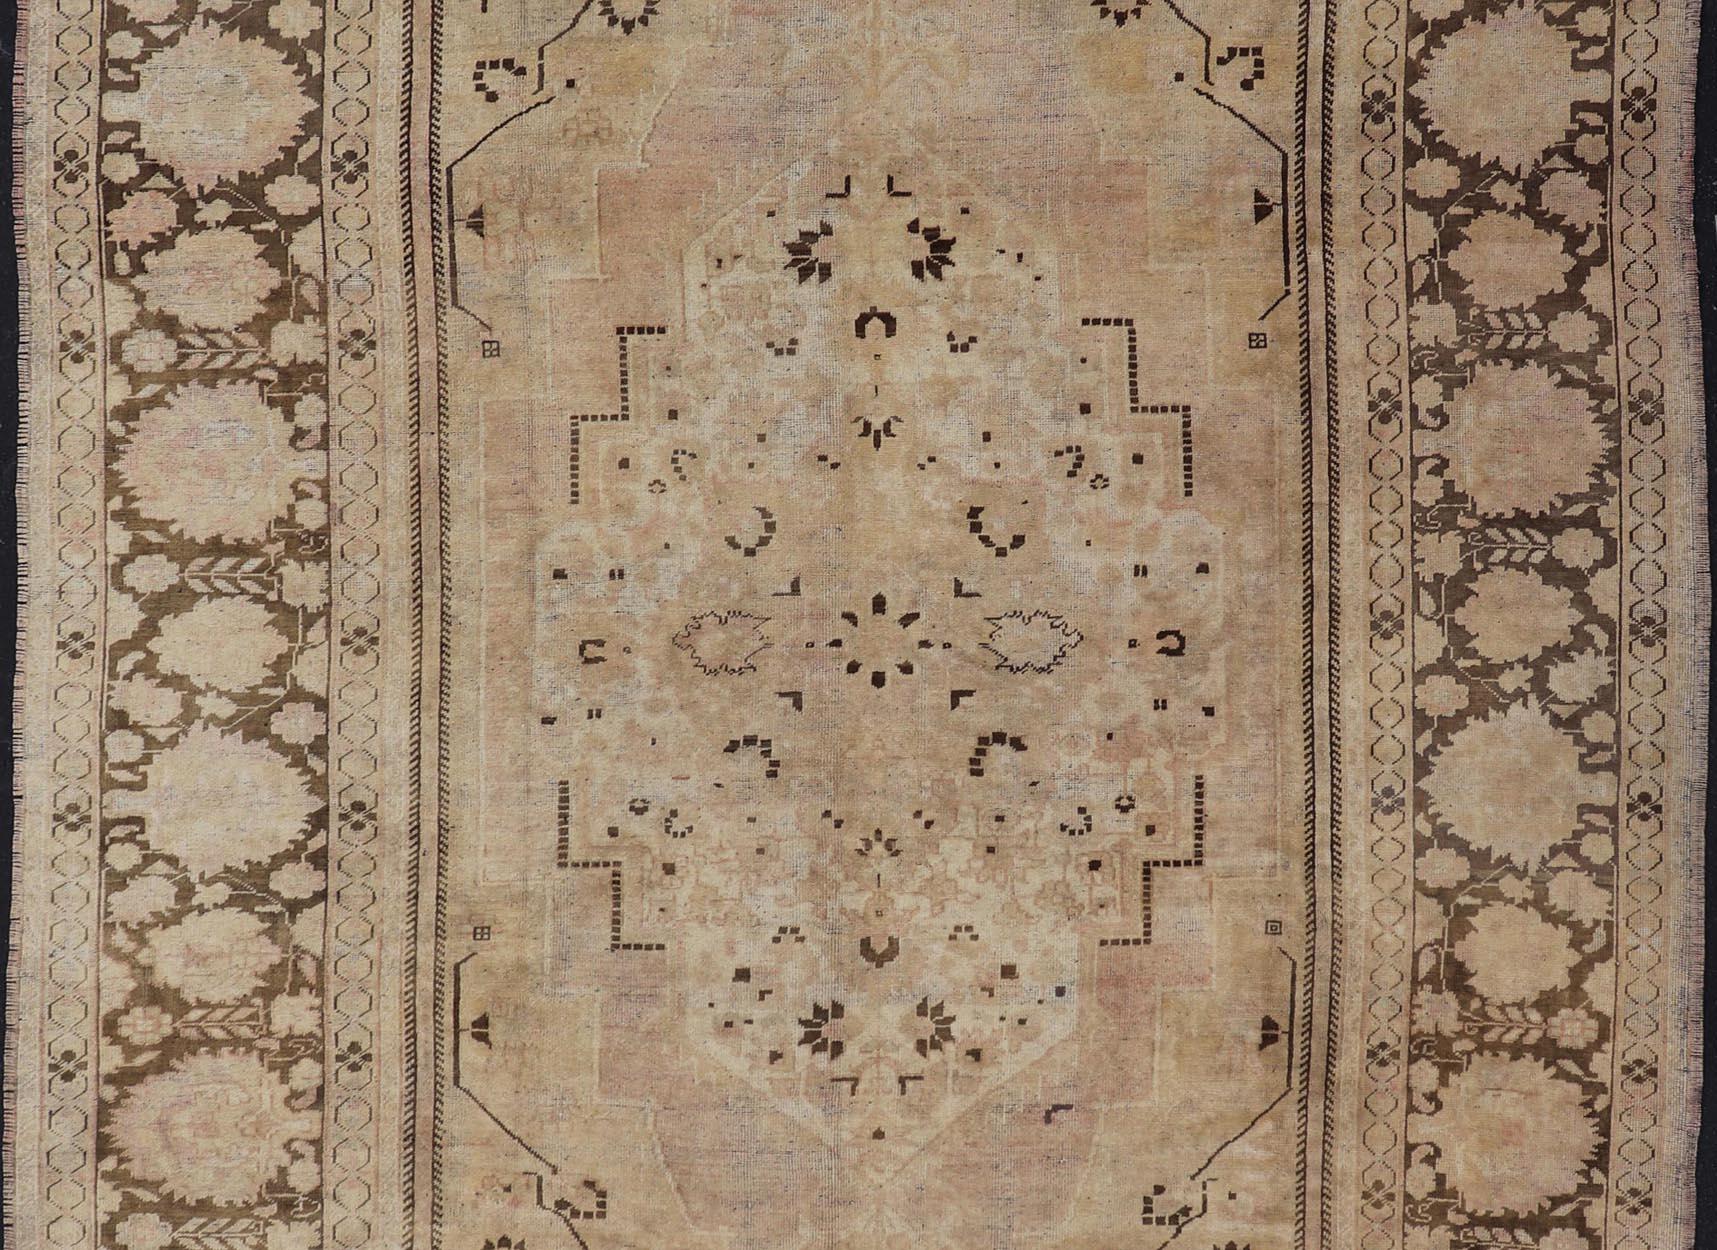 Hand-Knotted Vintage Oushak Rug with Muted Neutral Colors in Tan, Beige, Taupe, Gray & Brown For Sale